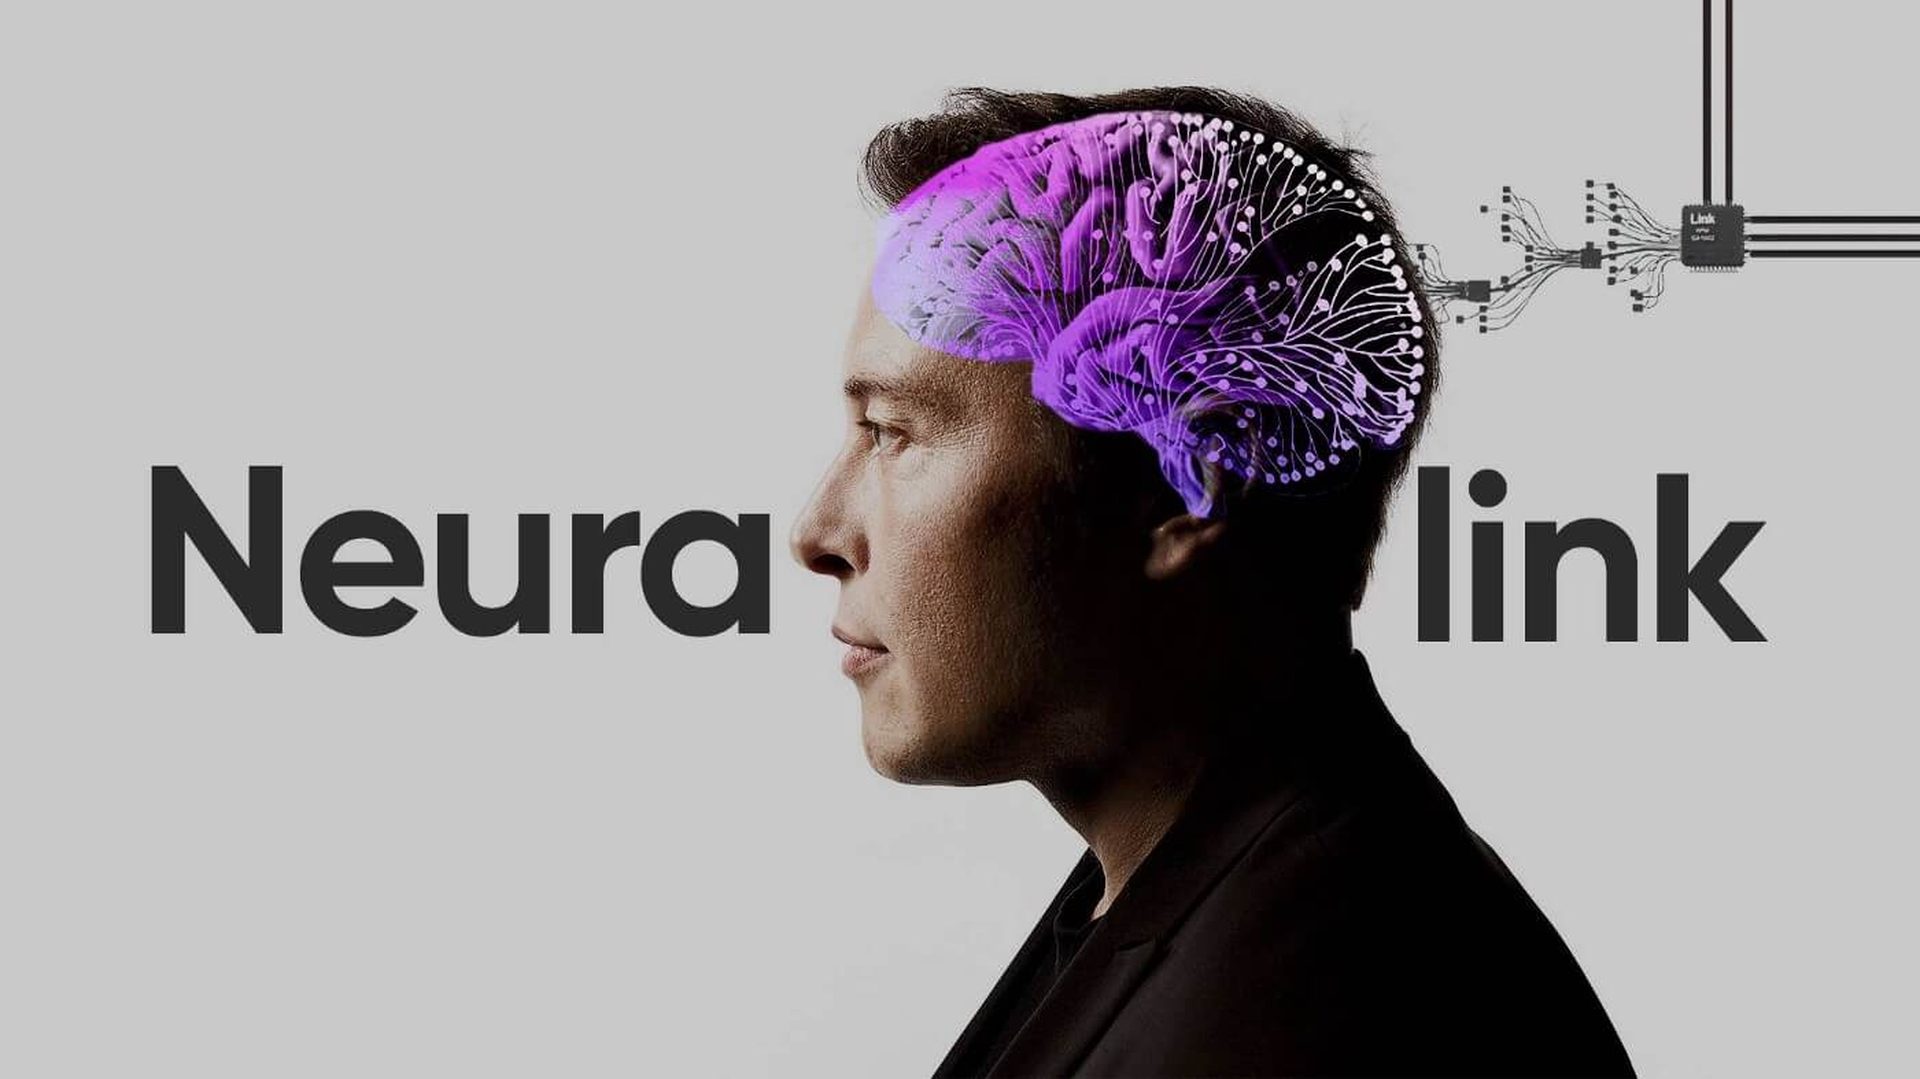 The U.S. Department of Agriculture launched an investigation against Elon Musk's Neuralink over animal experiments